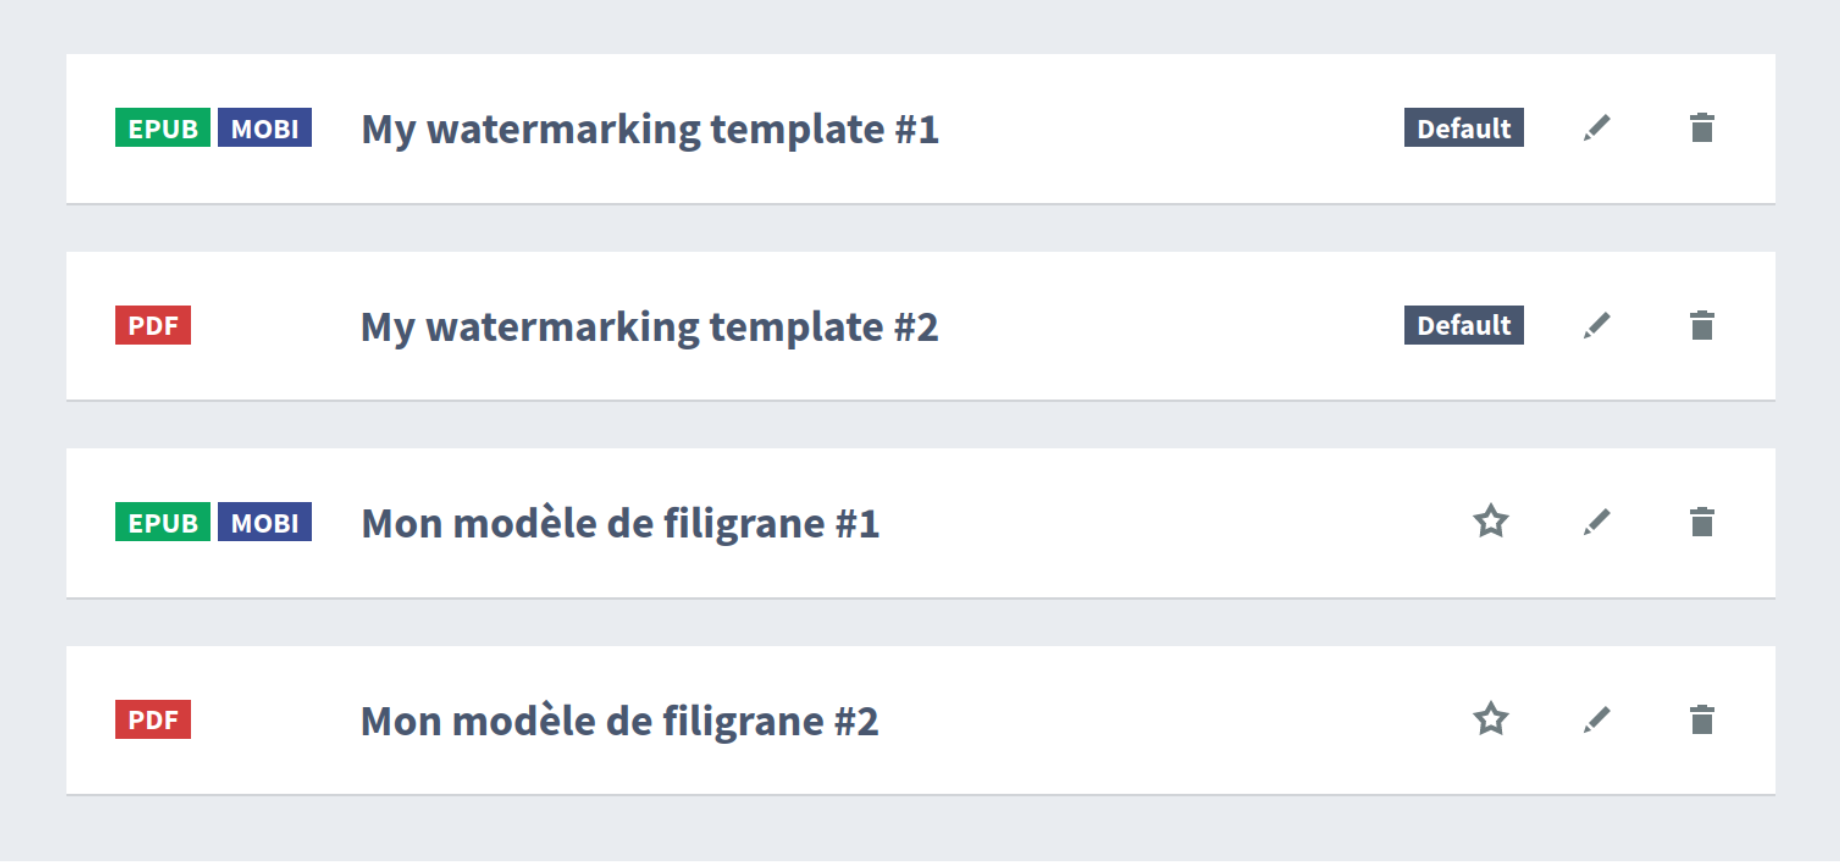 A watermarking template list with separate templates configured for English and French books